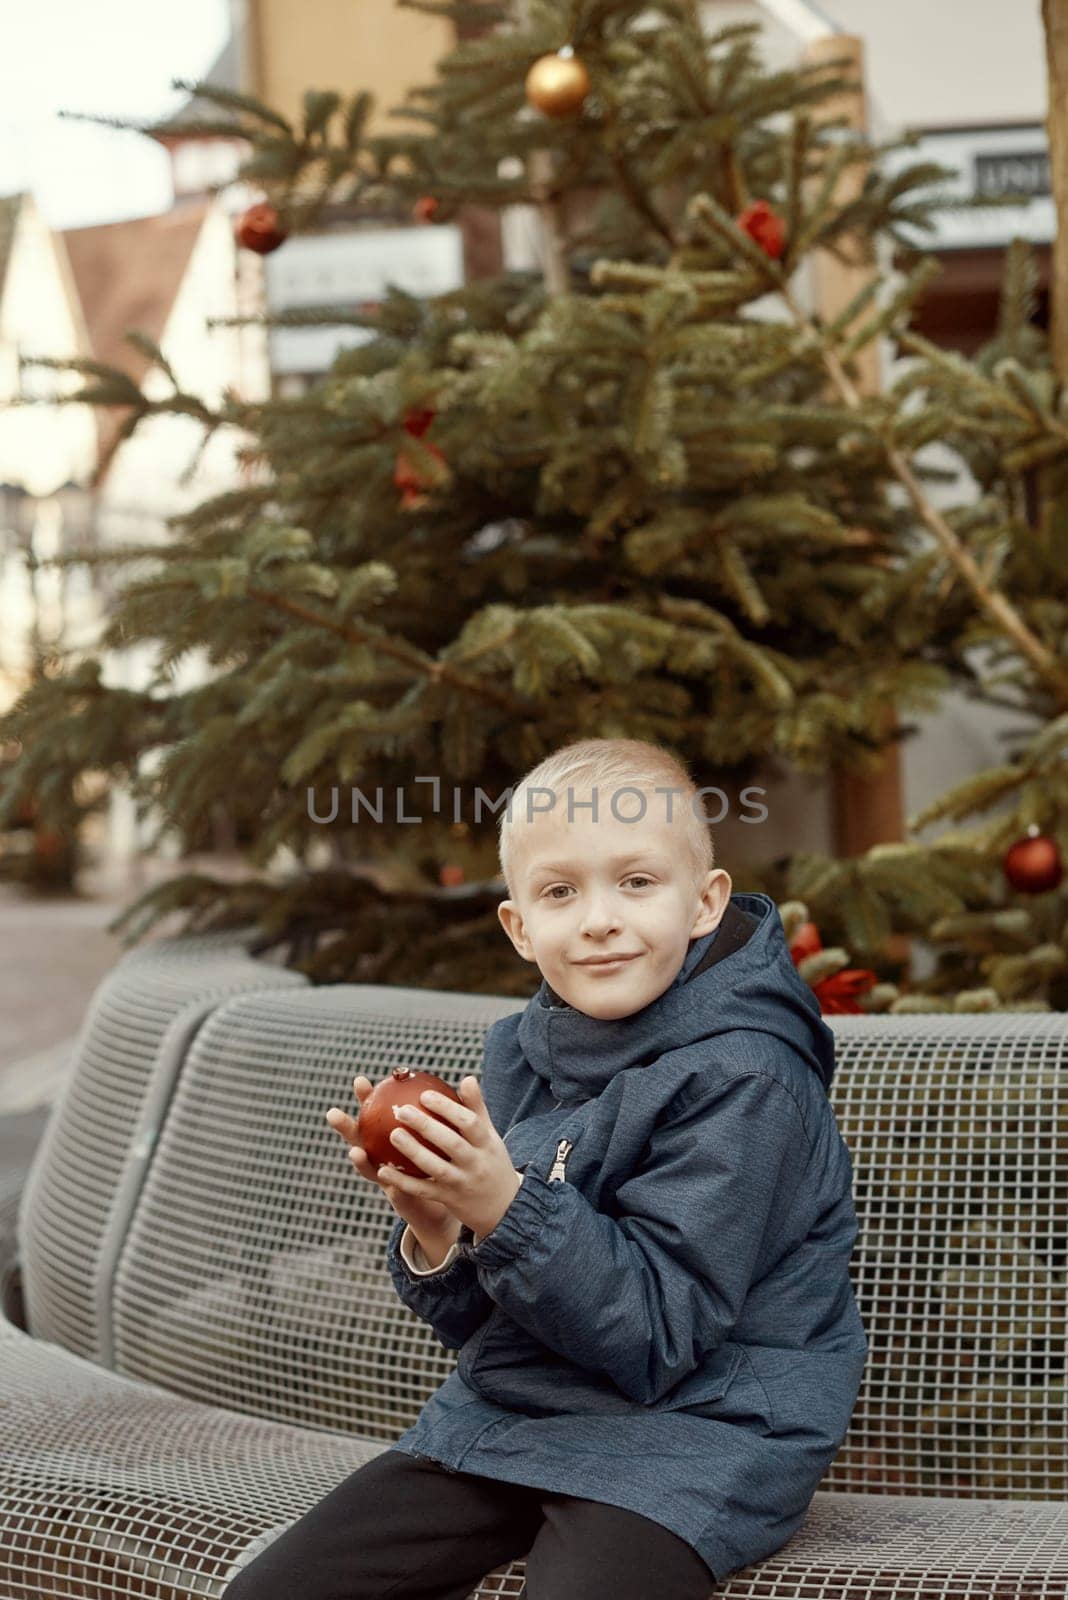 Winter Wonderland Delight: 8-Year-Old Boy with Christmas Decor by Vintage Fountain. by Andrii_Ko